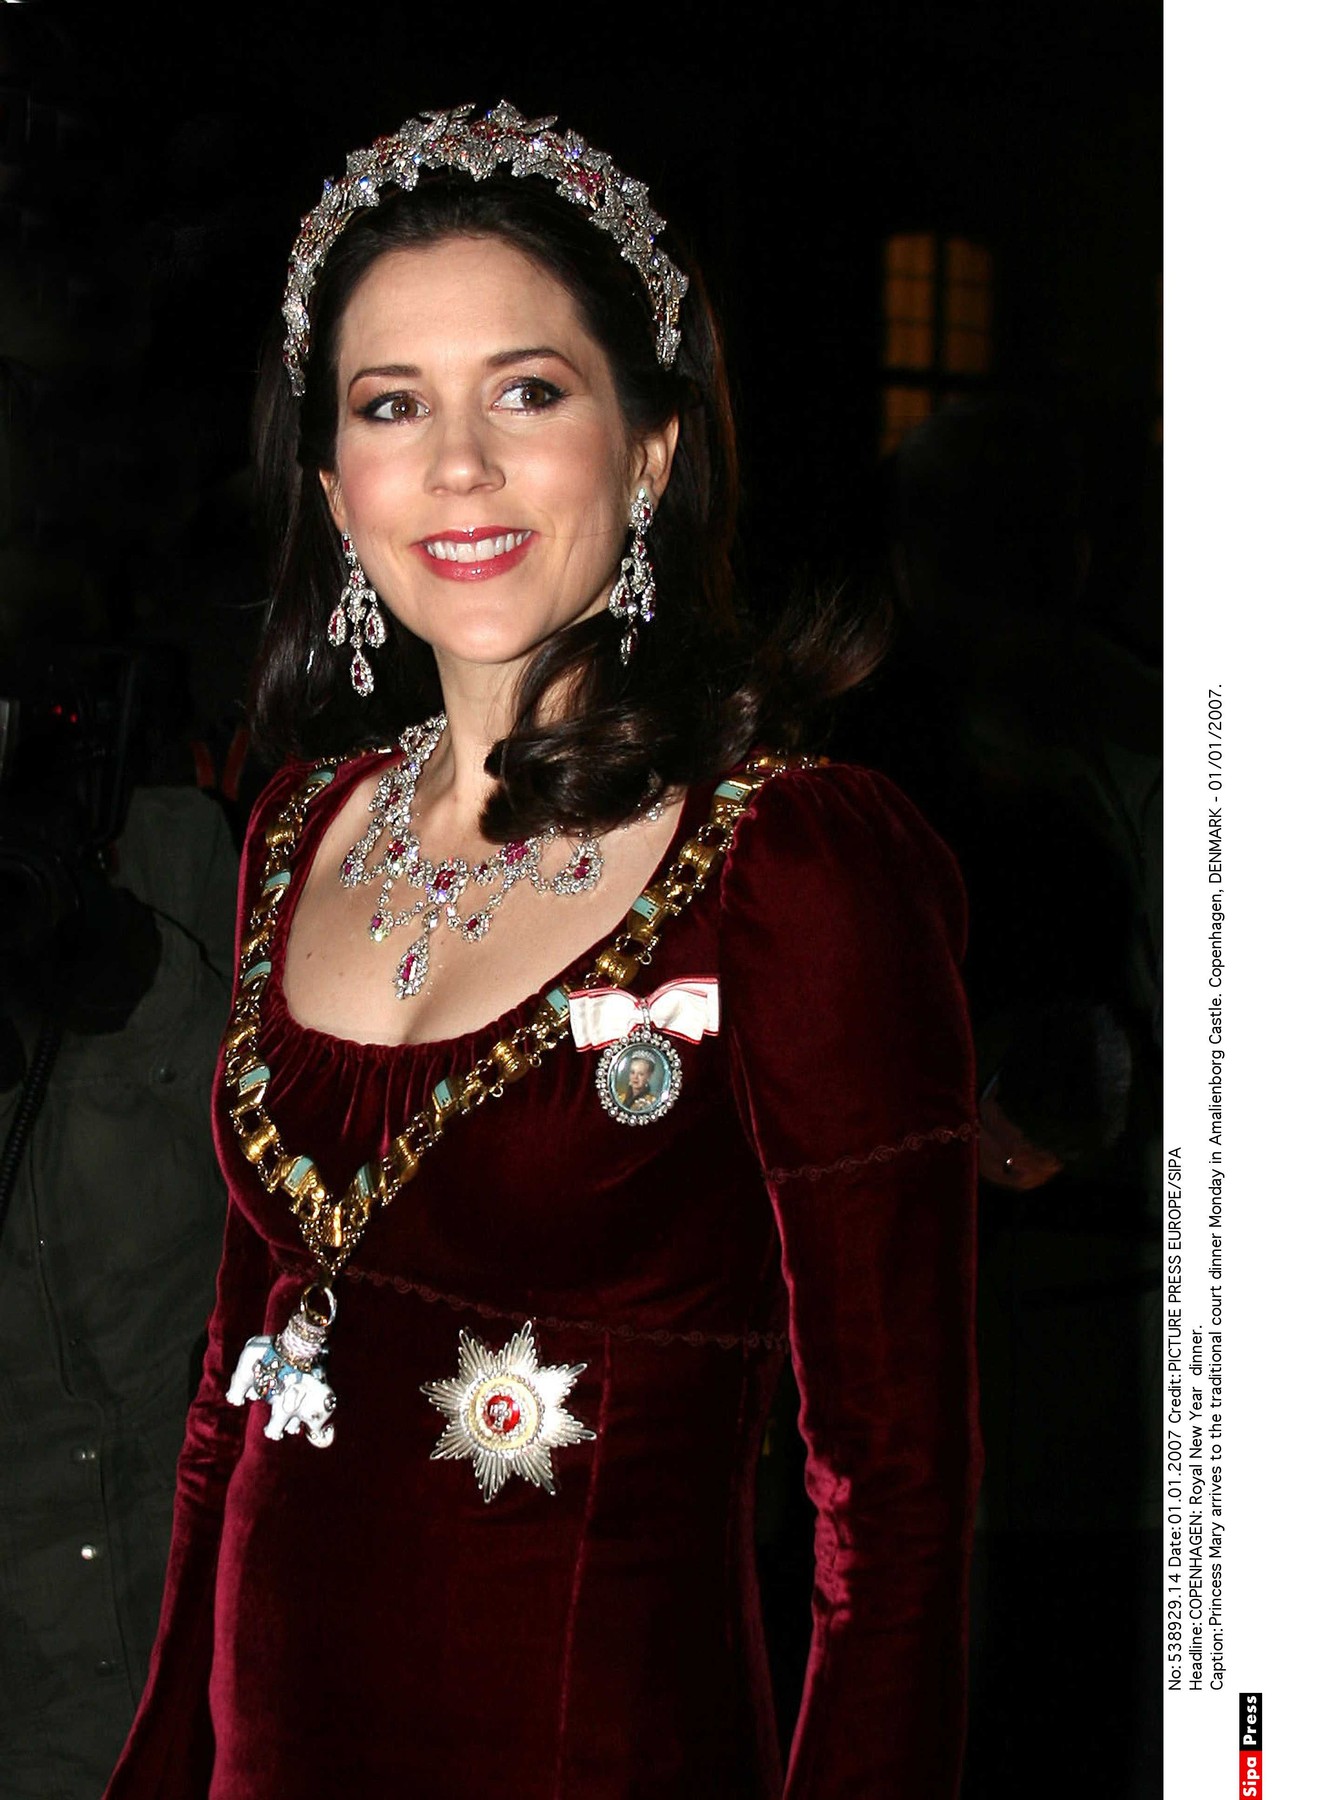 Princess Mary arrives to the traditional court dinner Monday in Amalienborg Castle. Copenhagen, DENMARK - 01/01/2007./0701021043, Image: 220278614, License: Rights-managed, Restrictions: , Model Release: no, Credit line: PICTURE PRESS EUROPE / Sipa Press / Profimedia